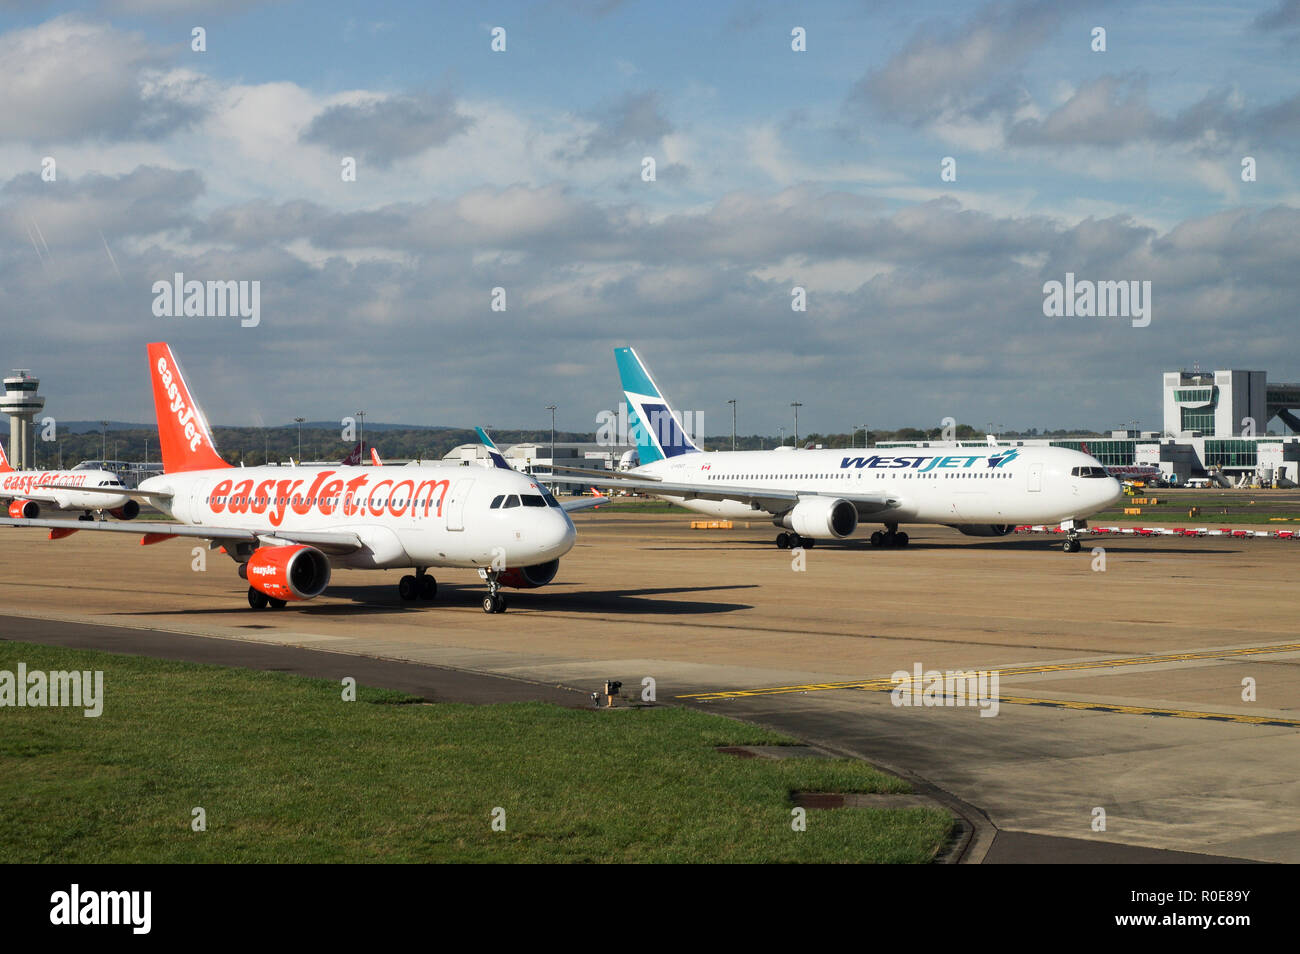 Busy Gatwick Airport in southeast England on a bright, sunny day Stock Photo